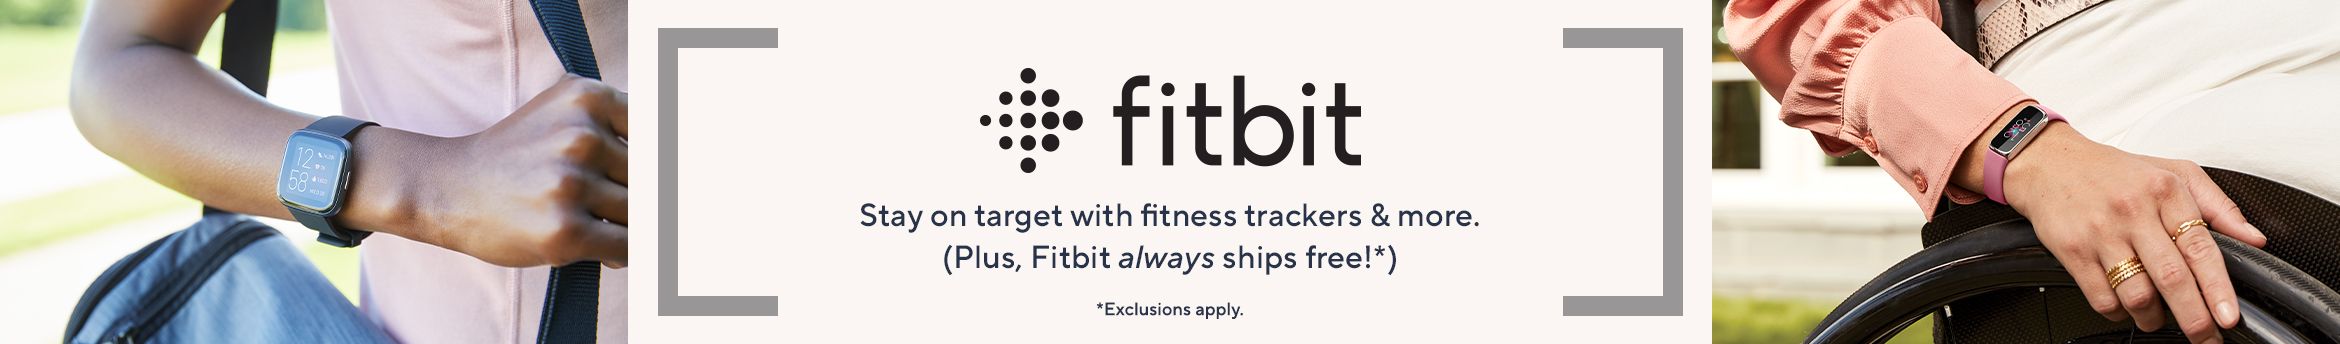 Fitbit.  Stay on target with fitness trackers & more. (Plus, Fitbit always ships free!*)  *Exclusions apply.